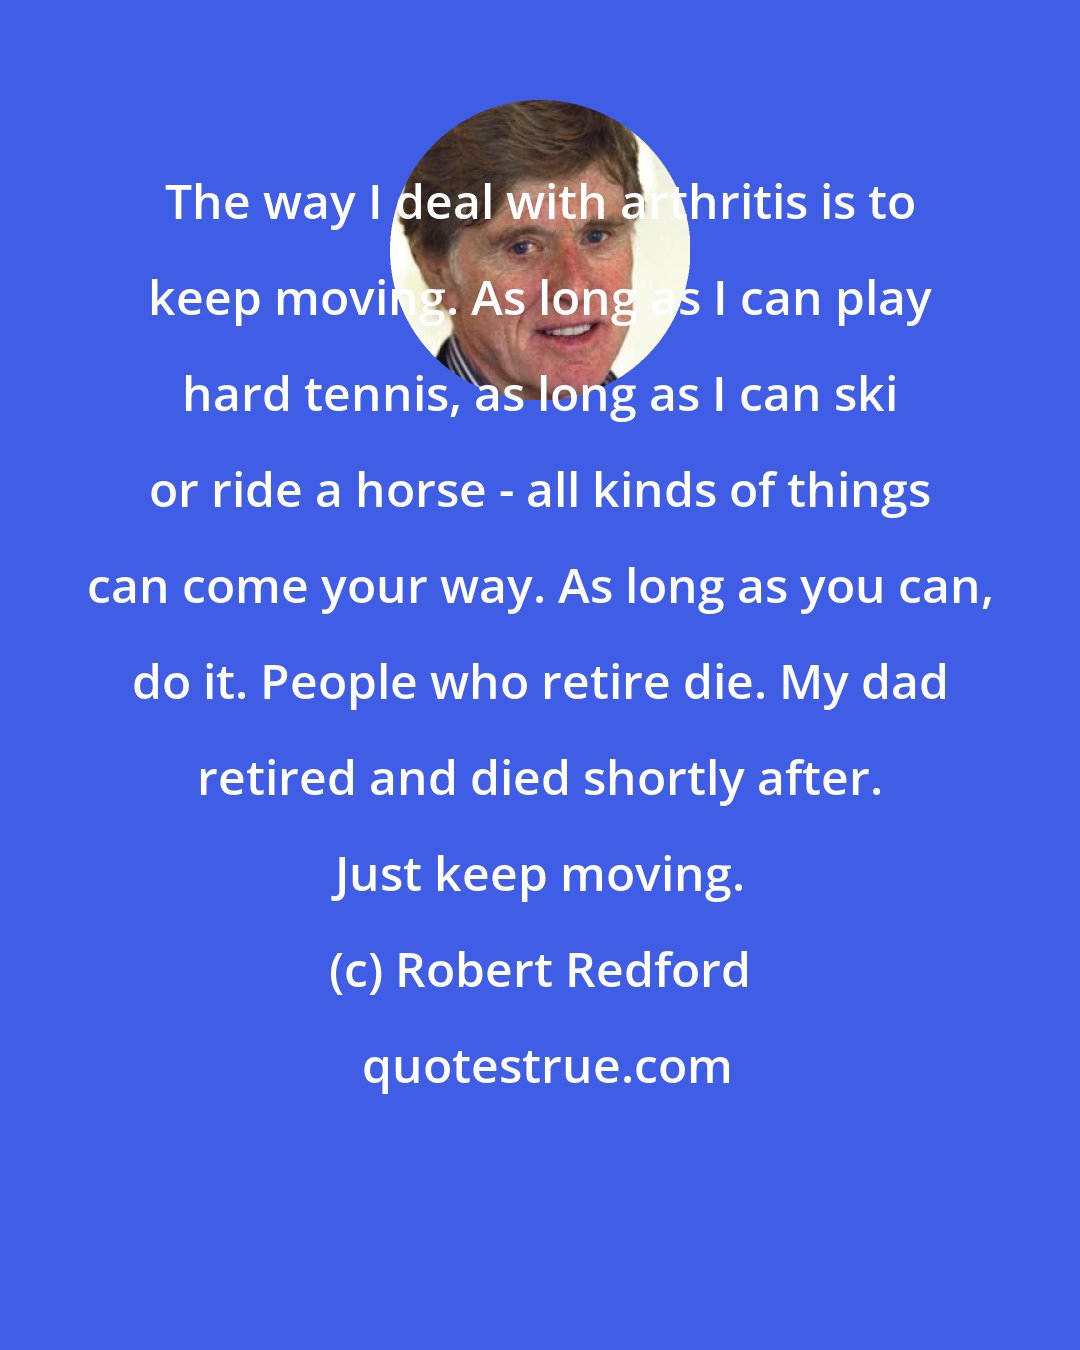 Robert Redford: The way I deal with arthritis is to keep moving. As long as I can play hard tennis, as long as I can ski or ride a horse - all kinds of things can come your way. As long as you can, do it. People who retire die. My dad retired and died shortly after. Just keep moving.